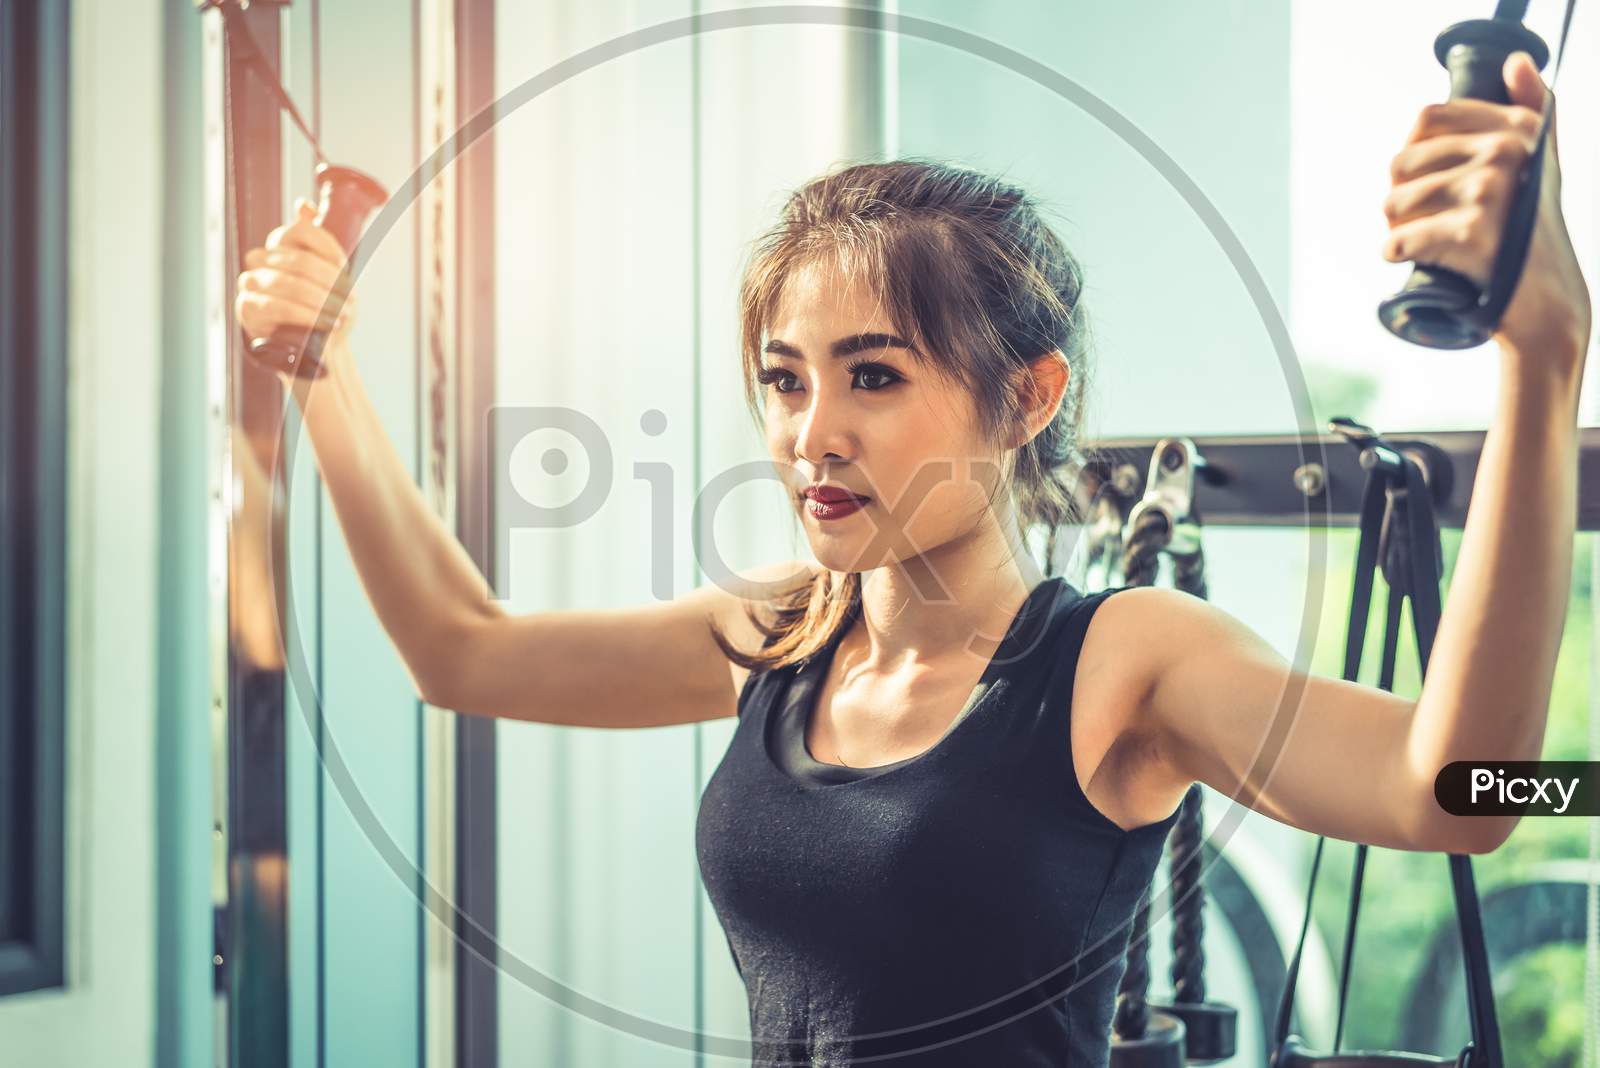 Asian Young Woman Doing Elastic Rope Exercises At Cross Fitness Gym. Strength Training And Muscular. Beauty And Healthy Concept. Sport Equipment And Sport Club Center Theme.